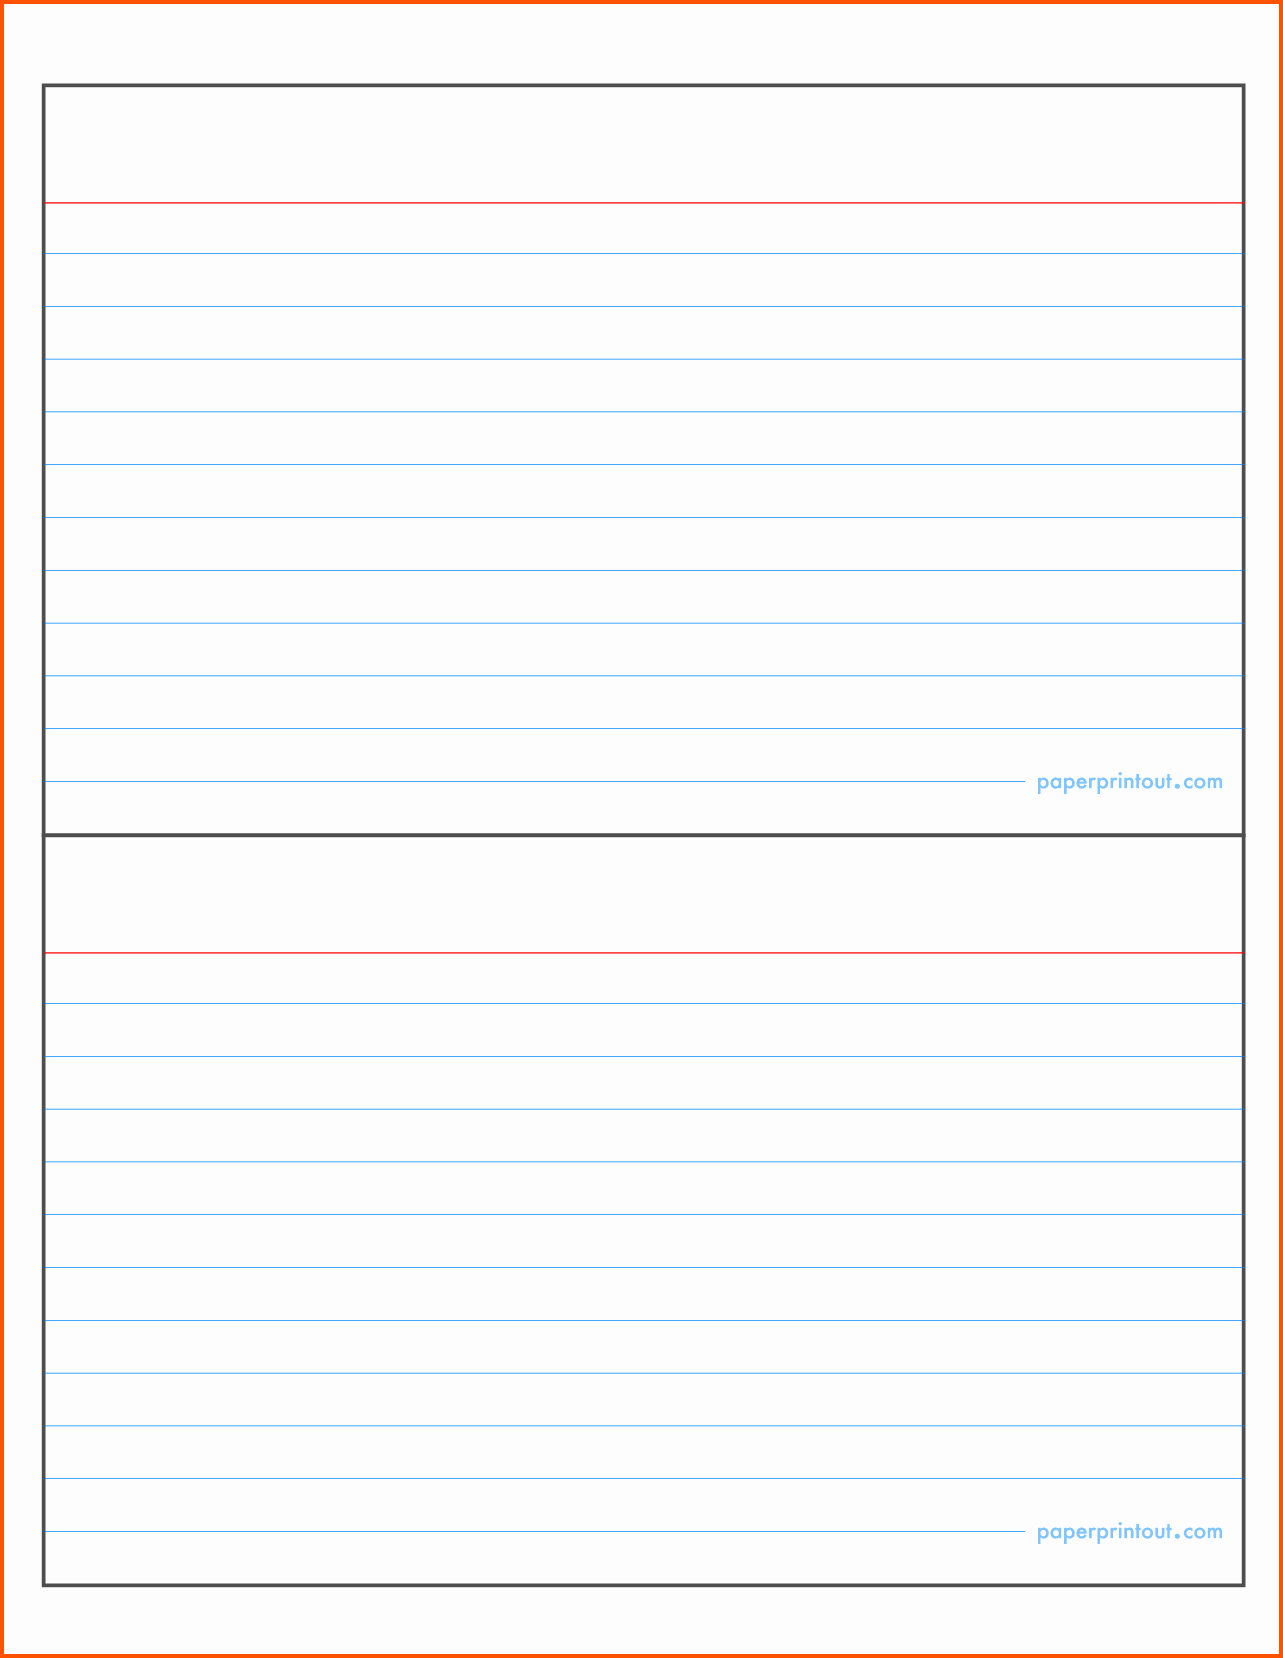 Note Card Template Free New Index Card Template